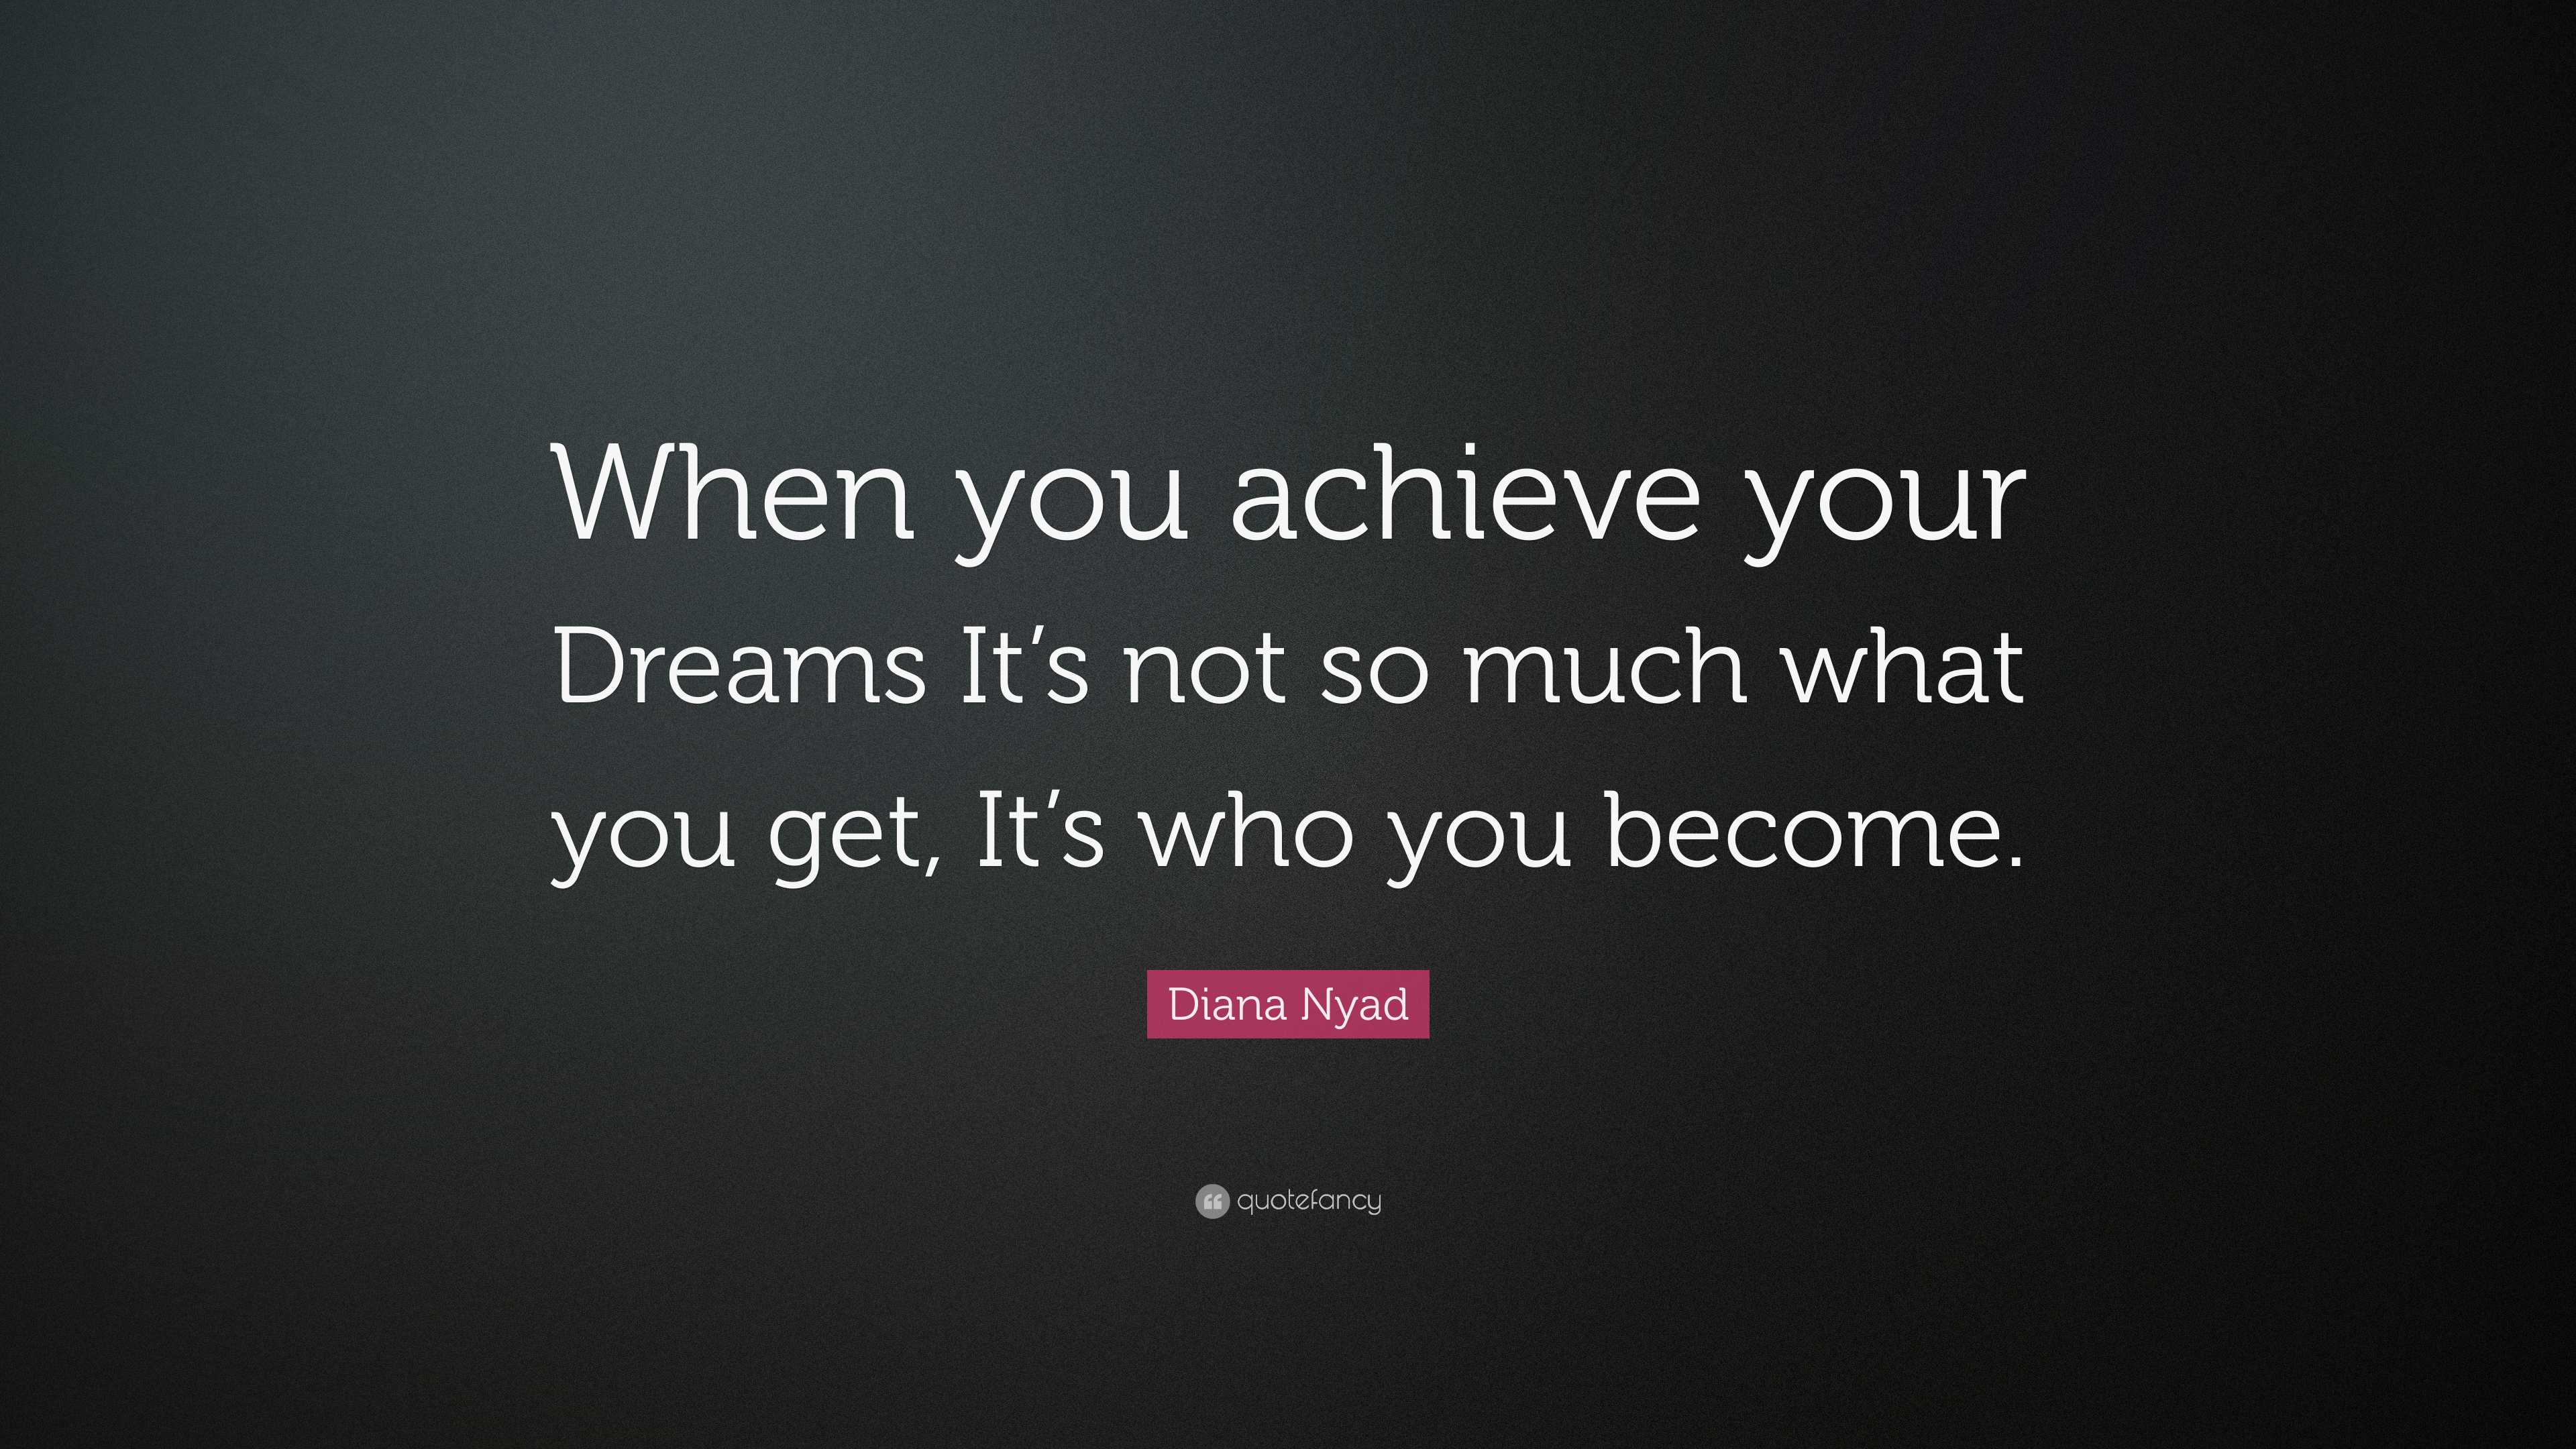 Diana Nyad Quote: “When you achieve your Dreams It’s not so much what ...